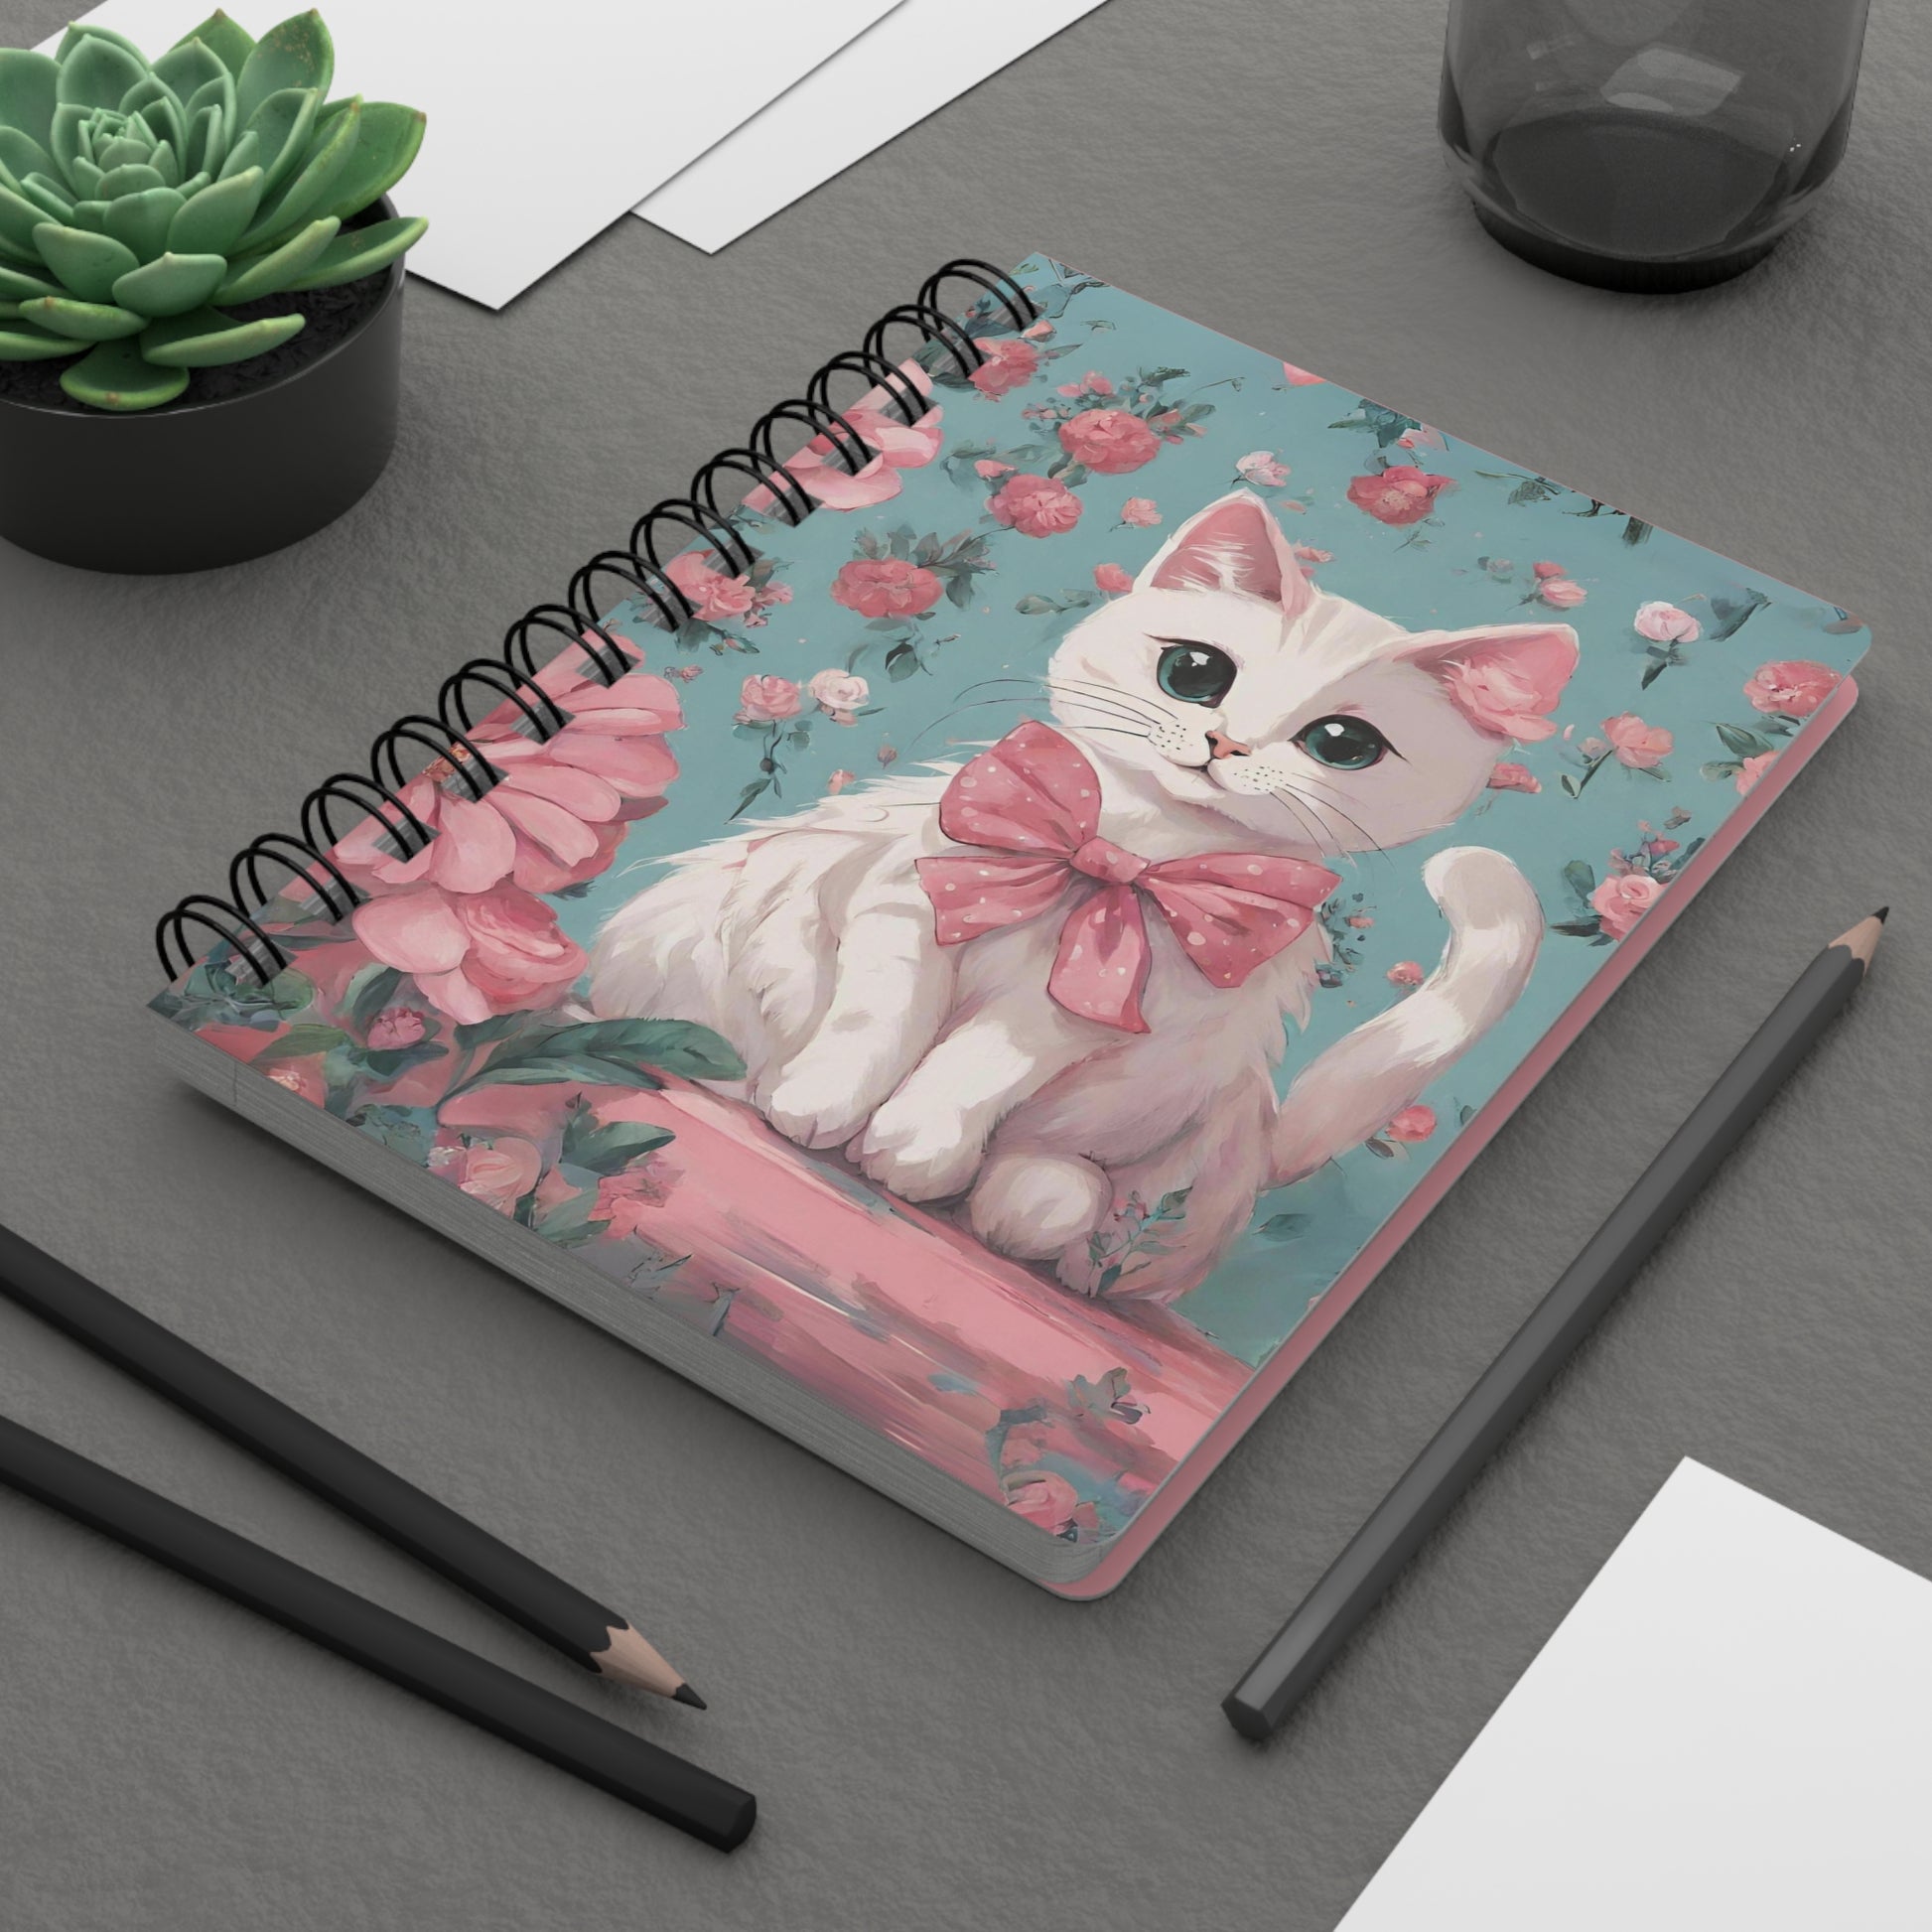 Floral Cat Spiral Journal, Cat Victorian vintage Notebook, Cute Cottagecore aesthetic Journal, Cat lover gift, Kawaii Back to school gift